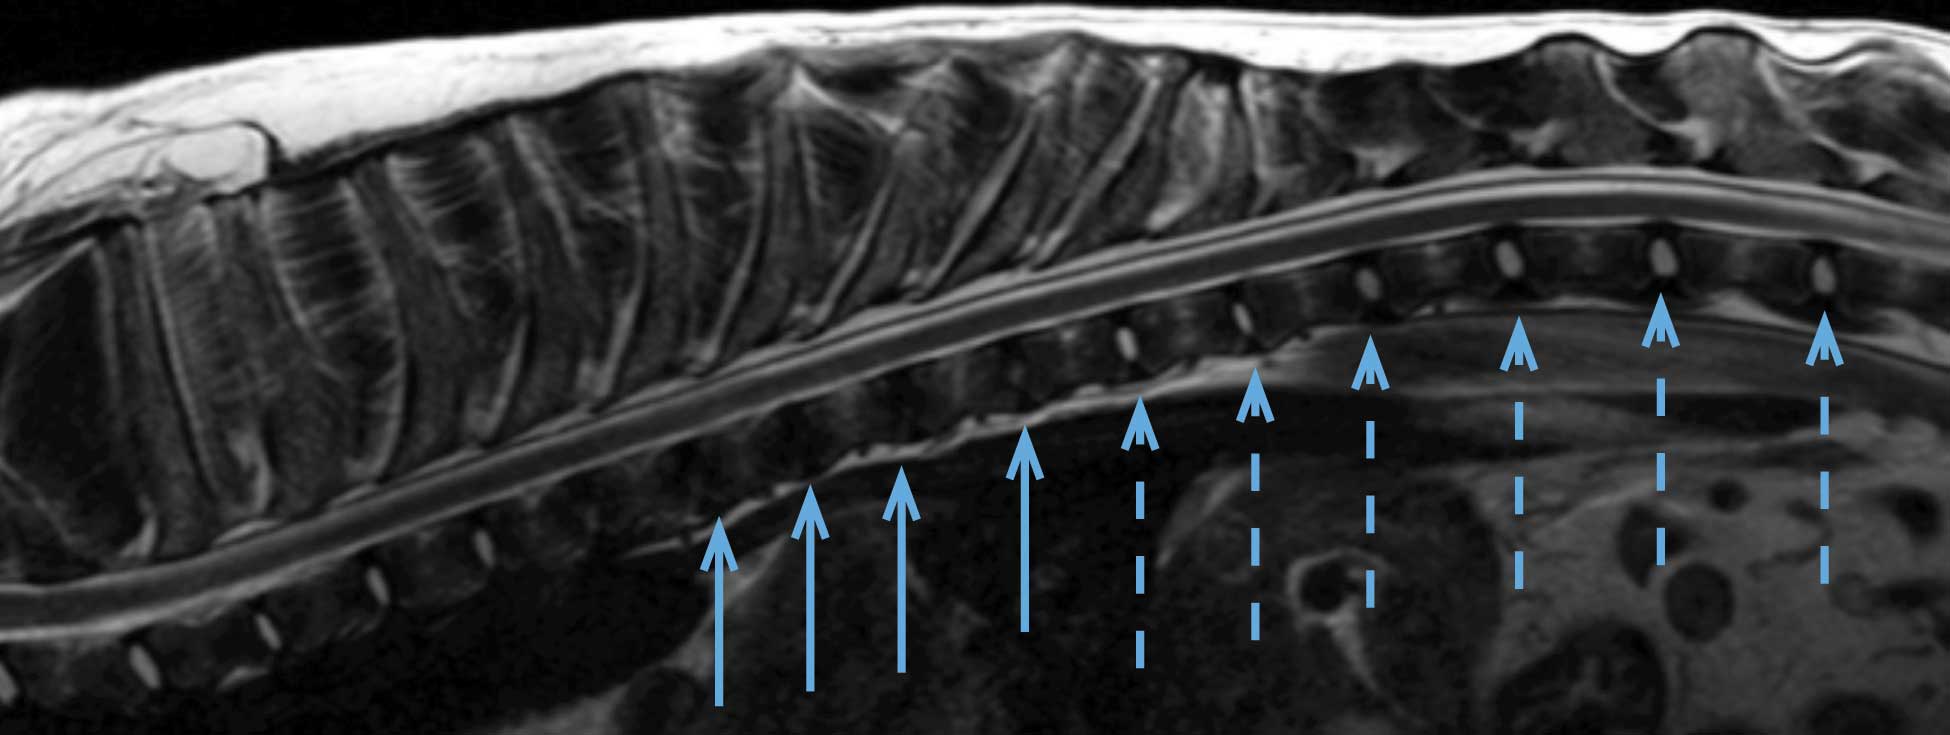 Figure 3. Sagittal T2-weighted MRI of the spine in a cocker spaniel. Note the dehydration of some of the discs (solid blue arrows) corresponding to chondroid metaplasia, compared to normally hydrated discs (dashed blue arrows).